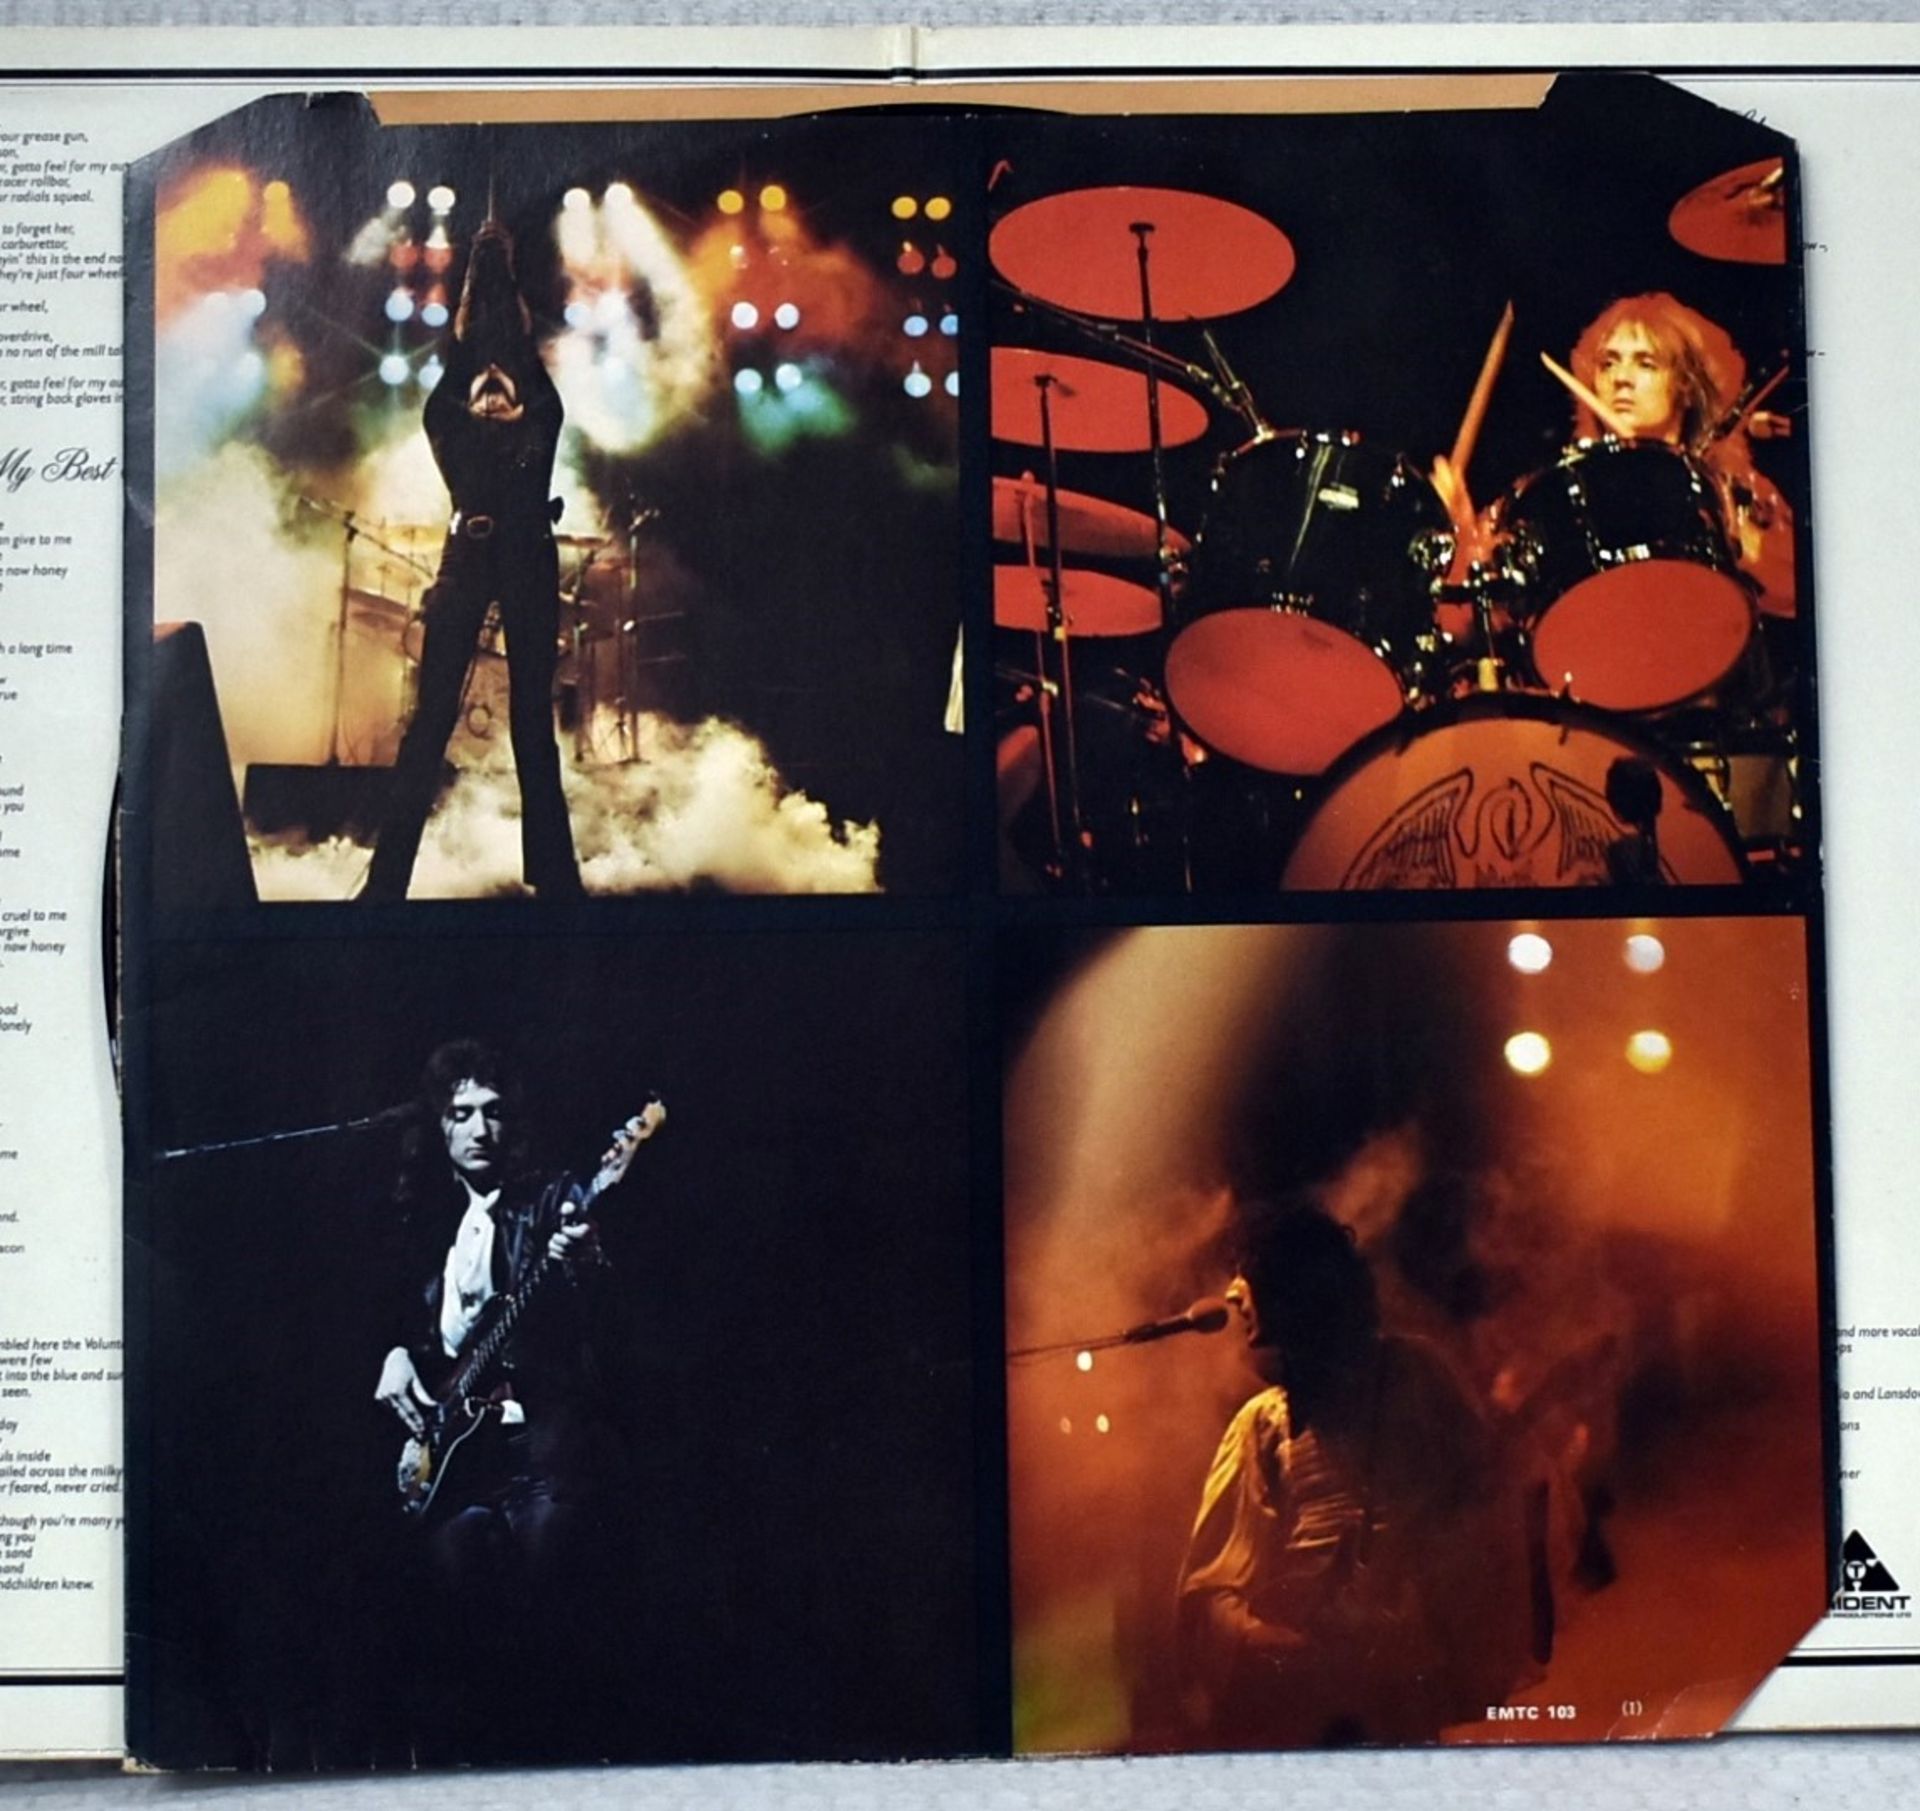 1 x QUEEN A Night At The Opera LP by EMI Records 1975 2 Sided 12 Inch Vinyl with Lyrics - Ref: - Image 13 of 21